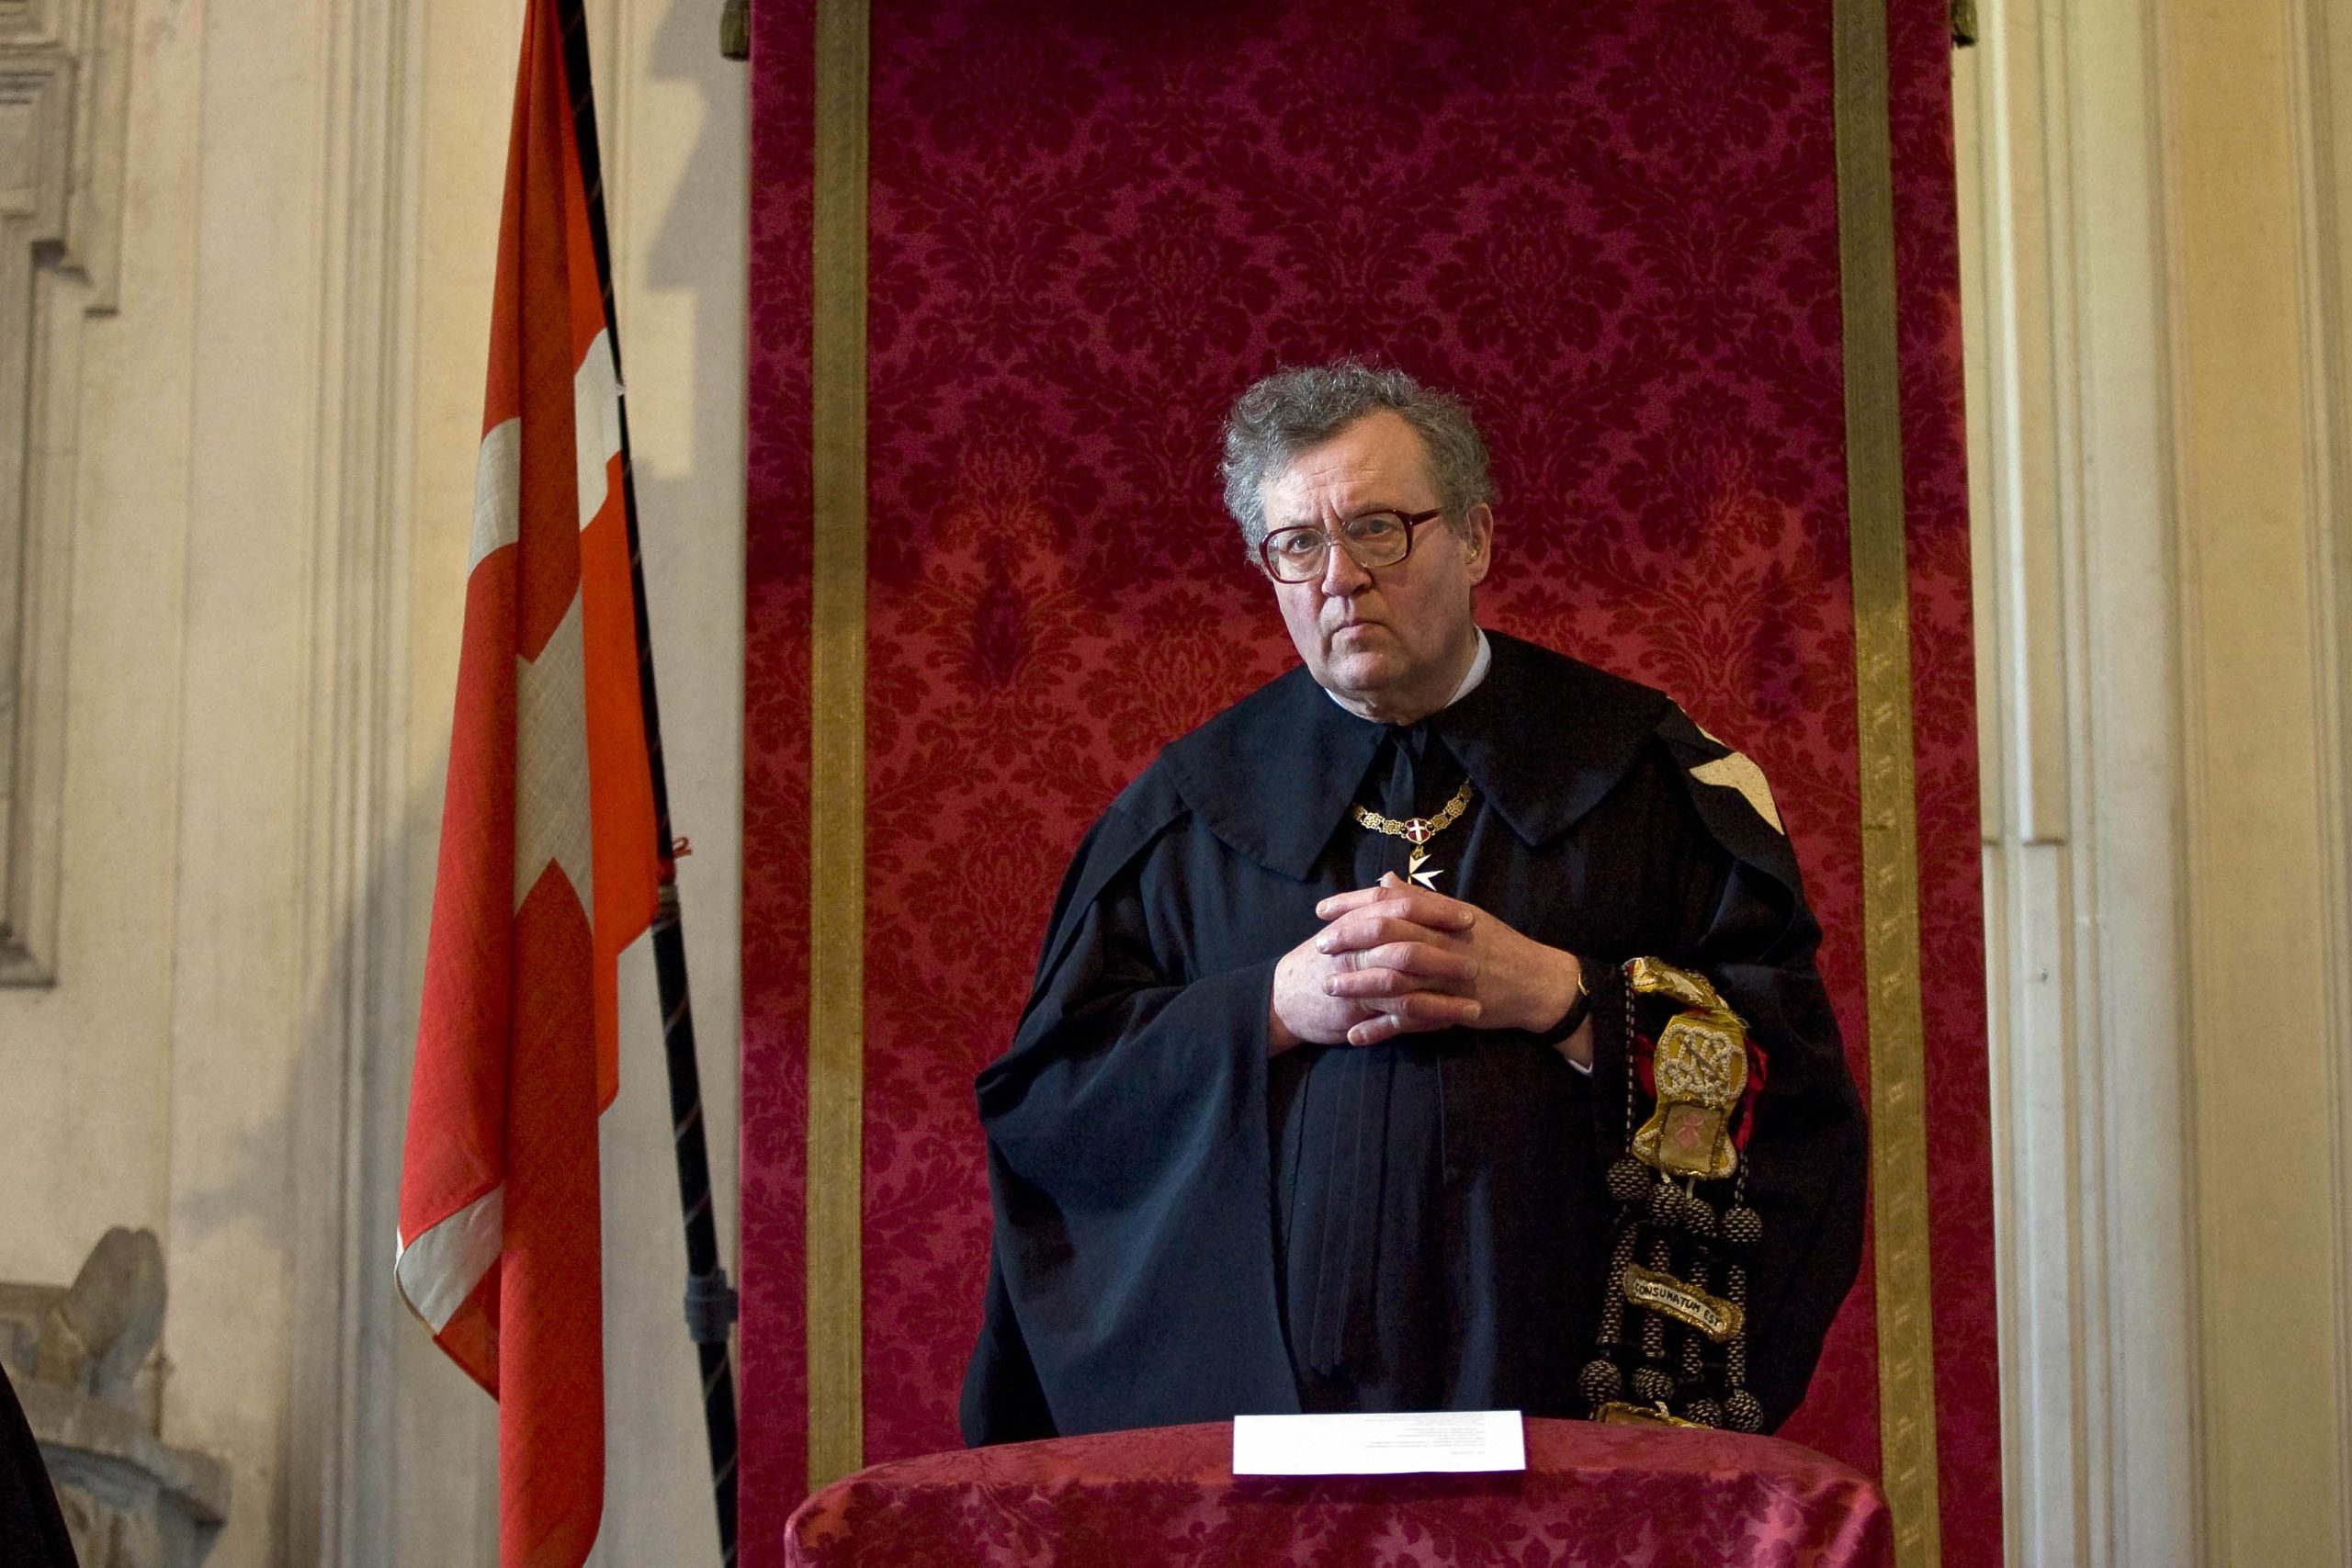 The 79th Grand Master of the Order of Malta